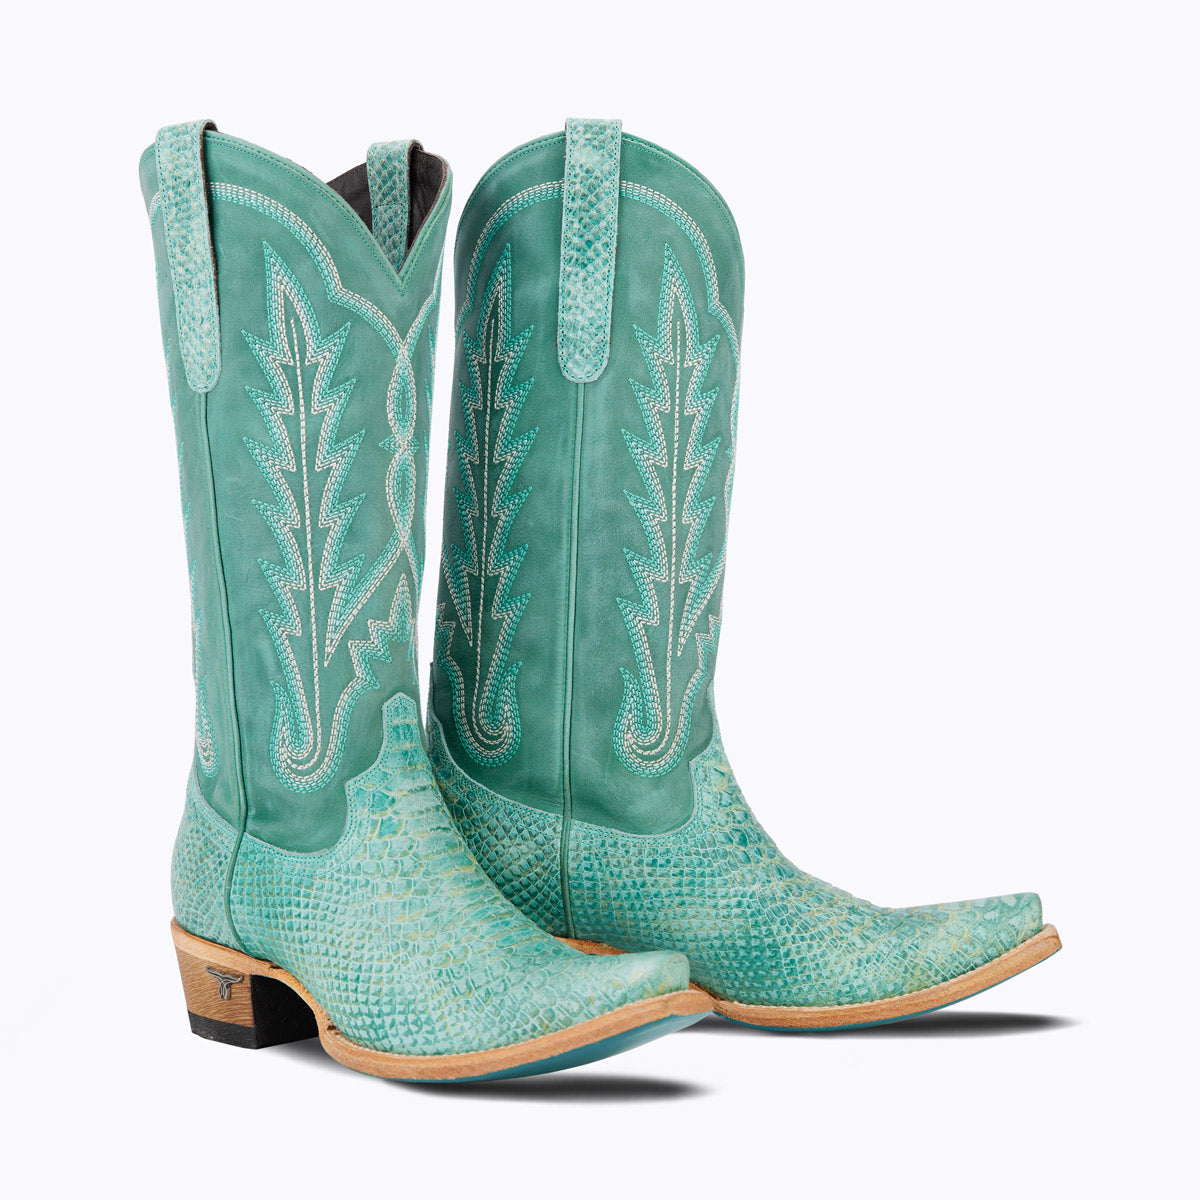 Lane LEXI ROGUE BOOTS in Tempting Turquoise